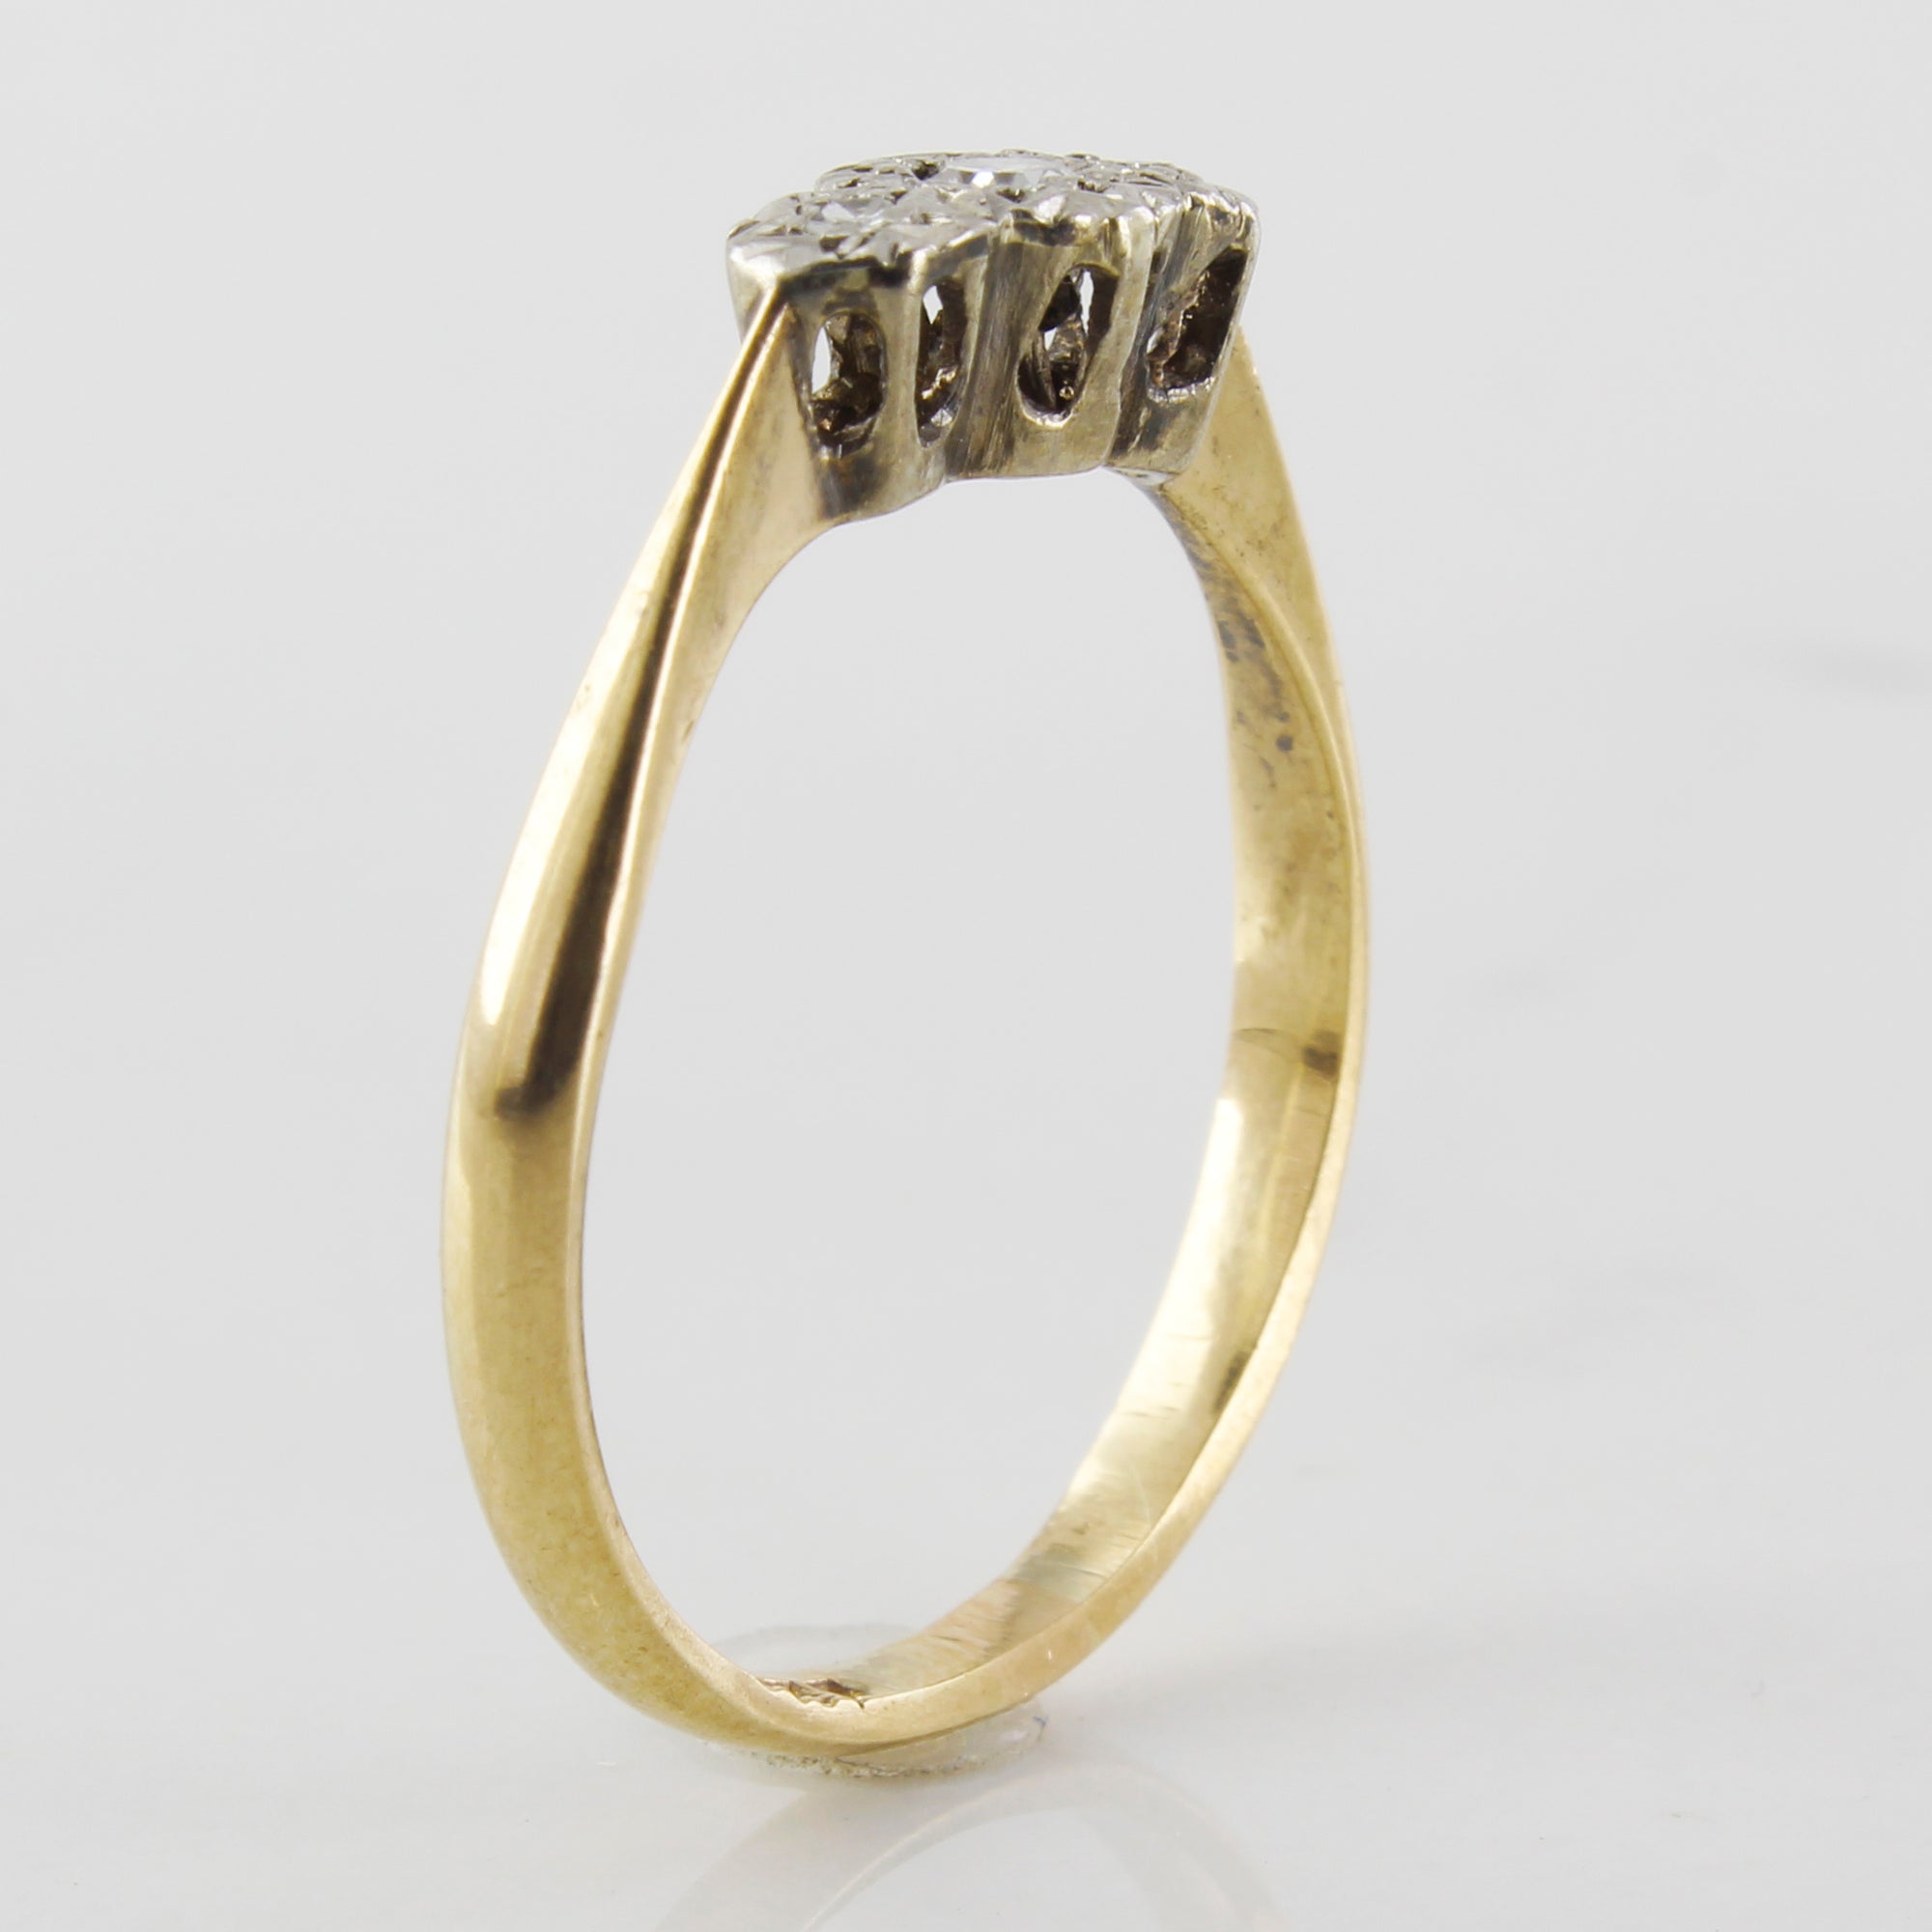 Three stone Illusion Set diamond ring, vintage ring for sale in Canada